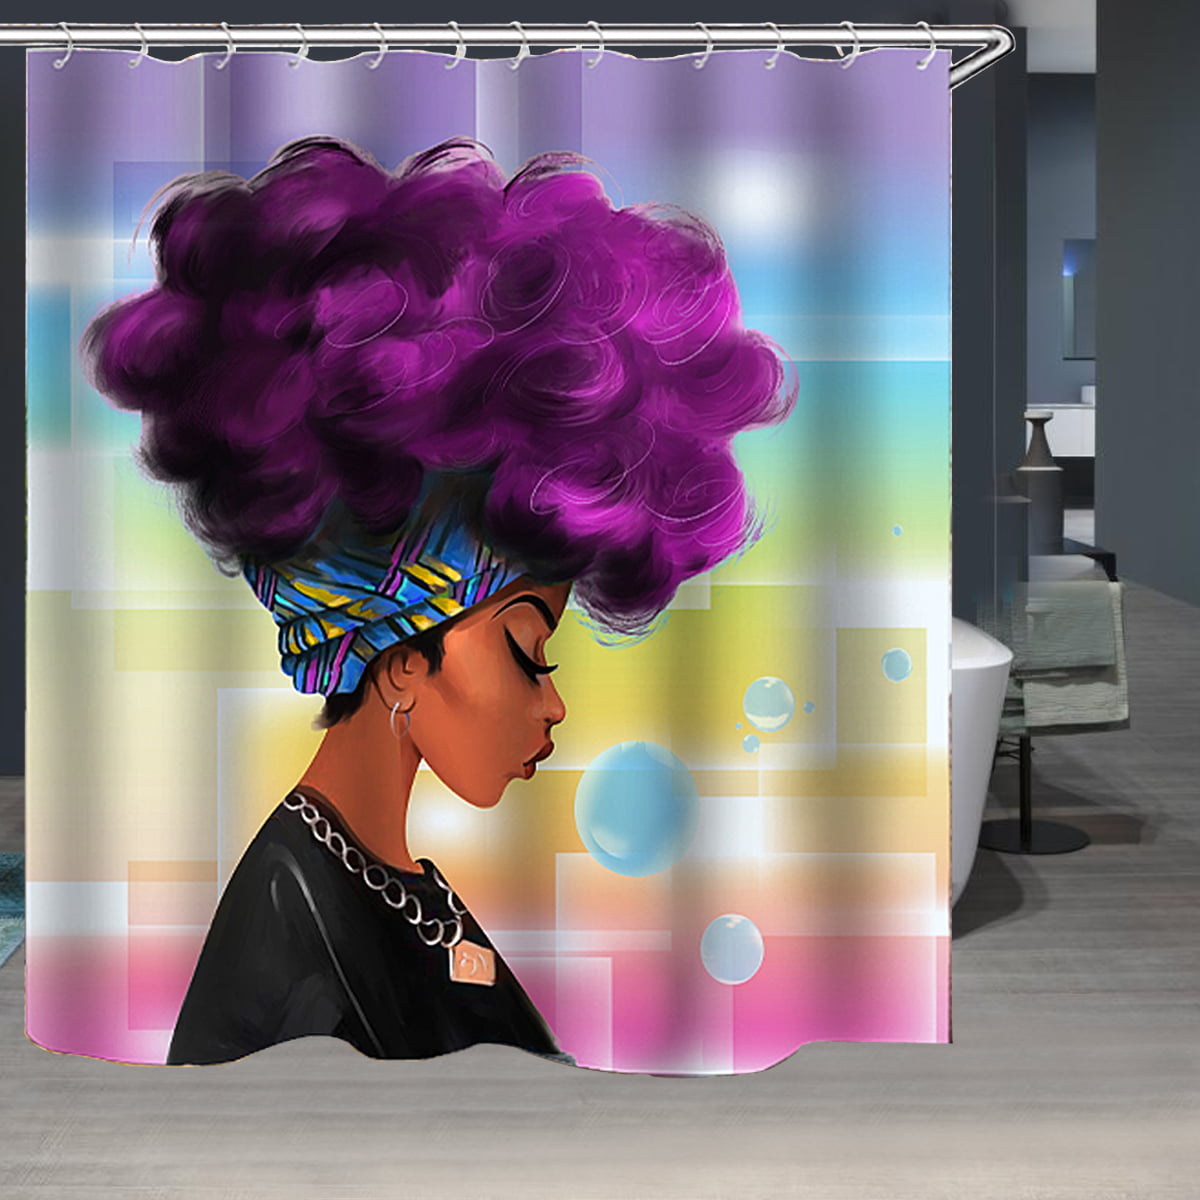 Black Girl Shower Curtain Decor 70 x 70 Inches Waterproof Mildew Resistant Polyester Fabric Machine Washable 12pcs Hooks Black Girl Purple Afro Hair Black Shirt Bubble Colorful Background